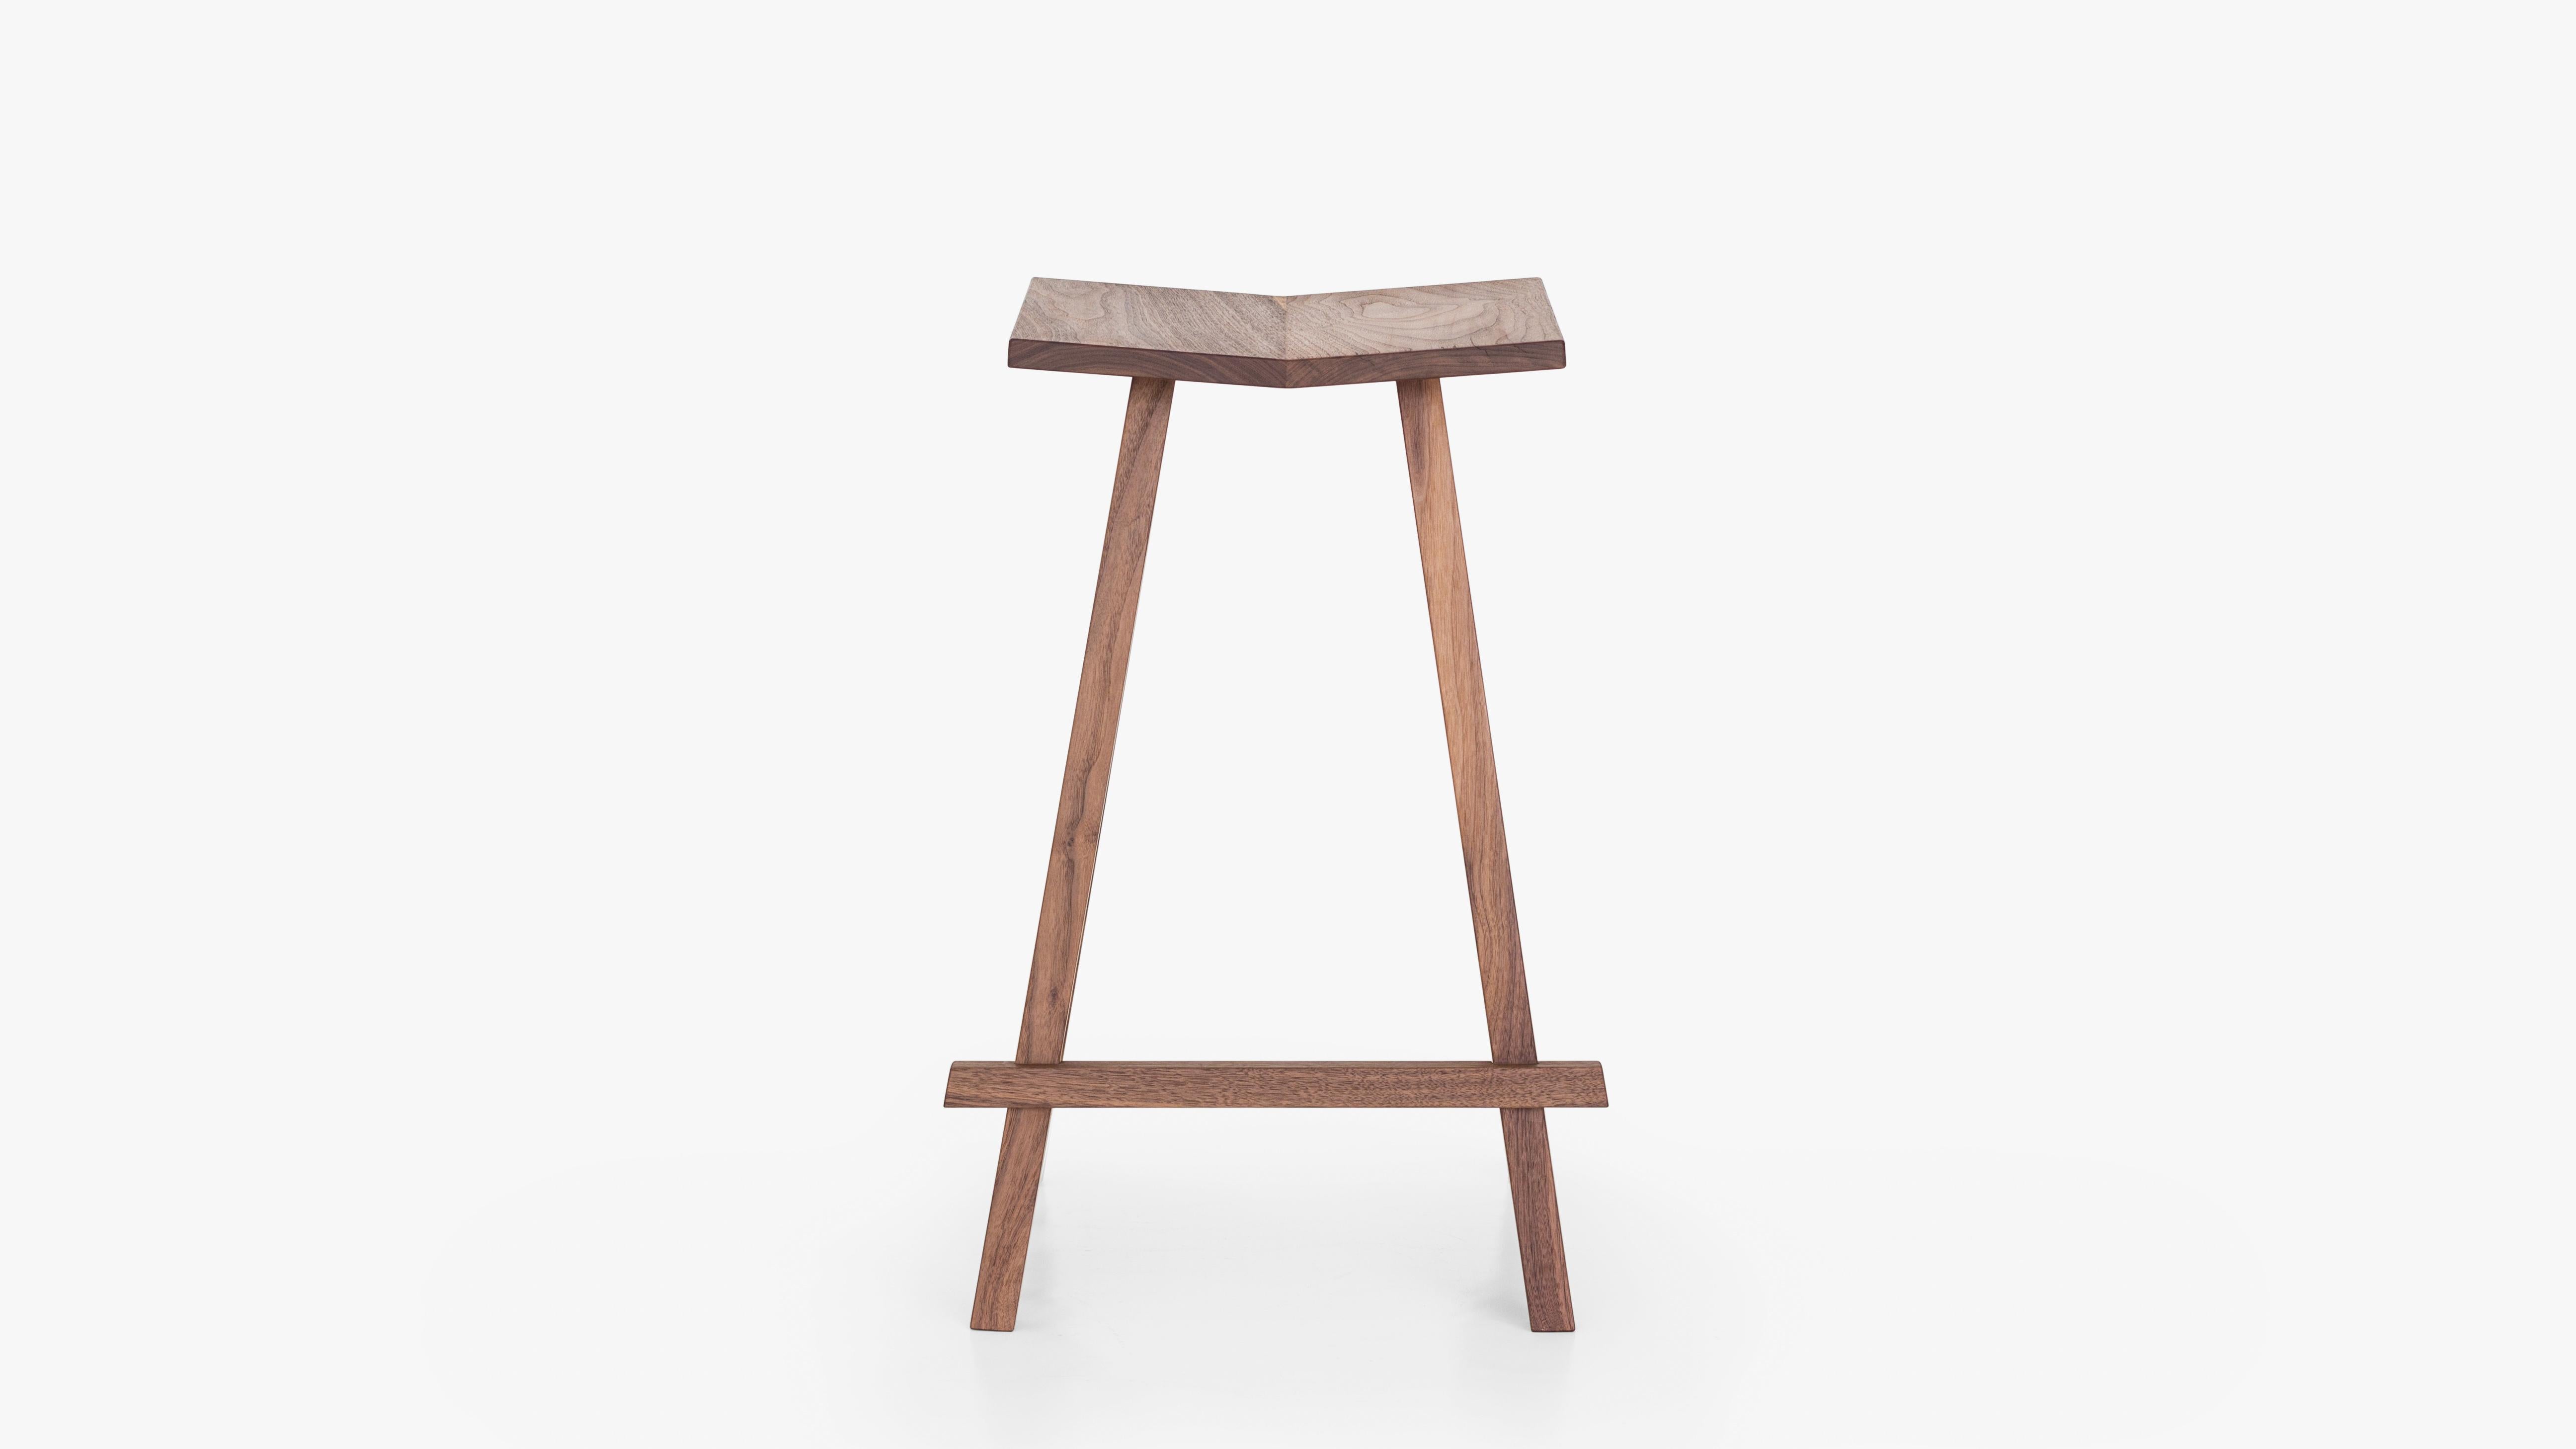 Inspired by Japanese joinery, Mr and Mrs White created the Woodford bar stool, which fuses design elements of simplicity and sophistication to create a functional yet beautiful piece of furniture for everyday use. Handcrafted in your choice of wood,